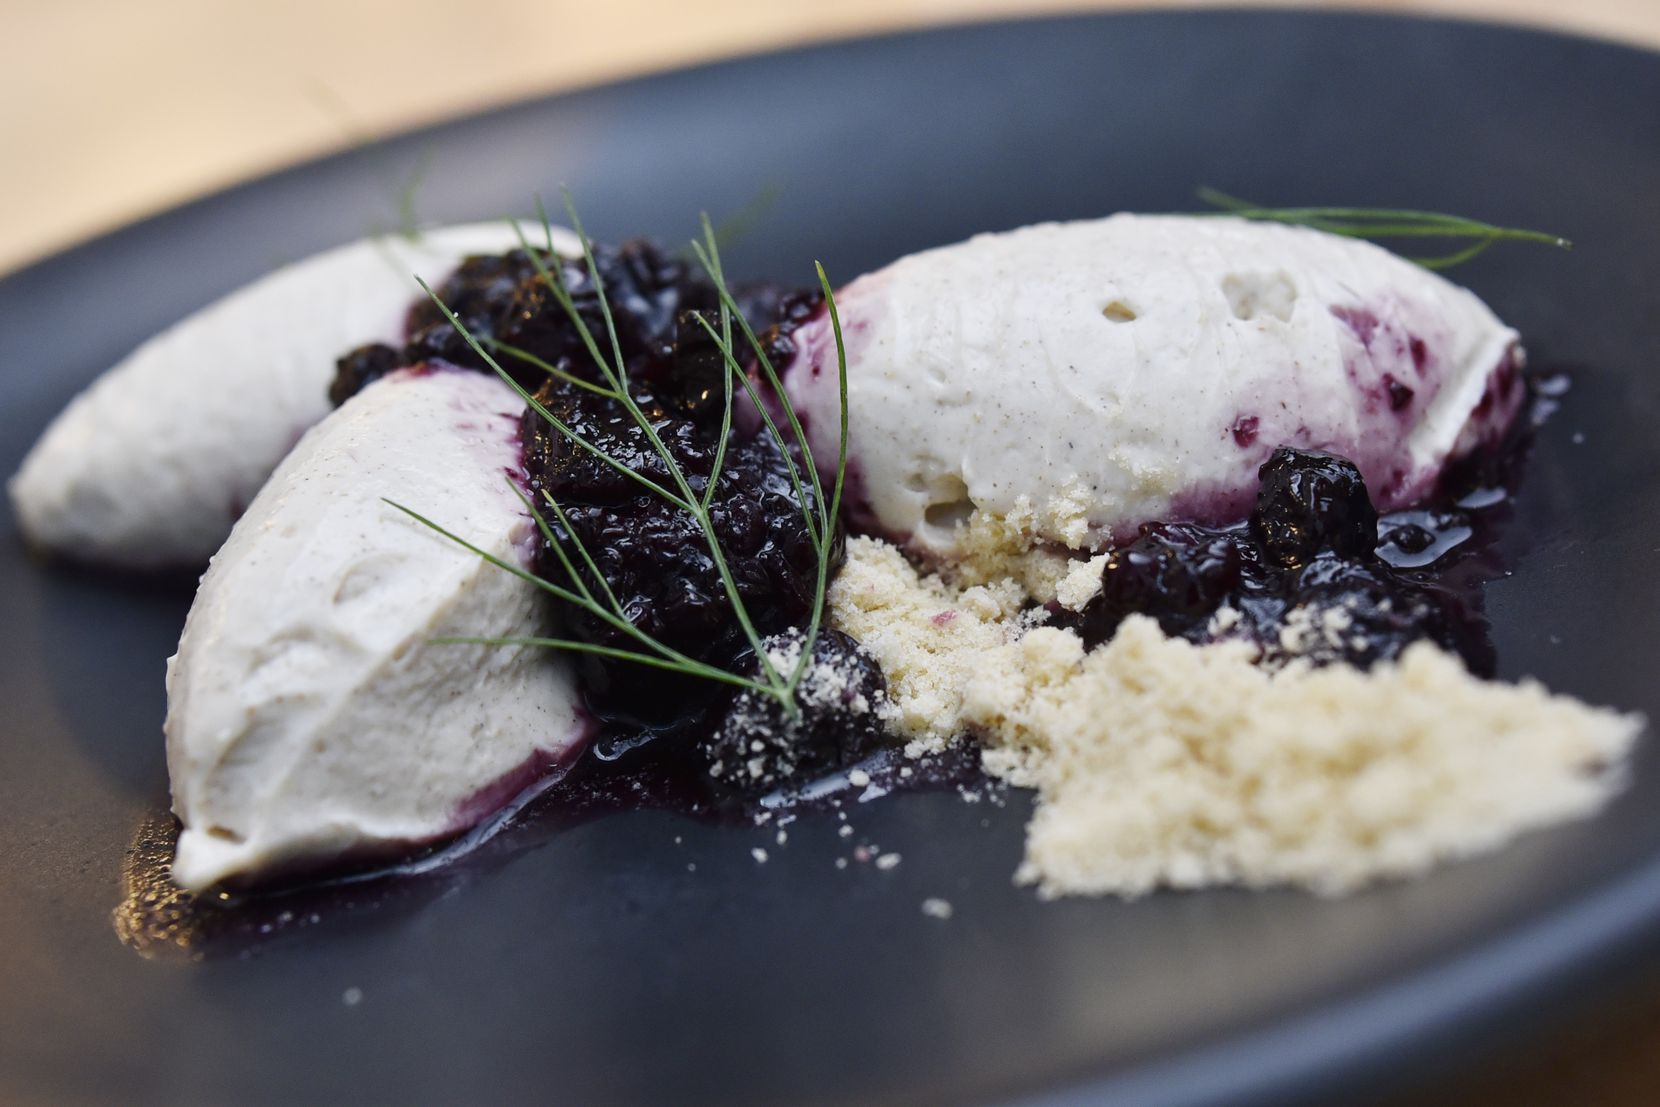 Pressed greek yogurt with berry compote and brown butter crumble